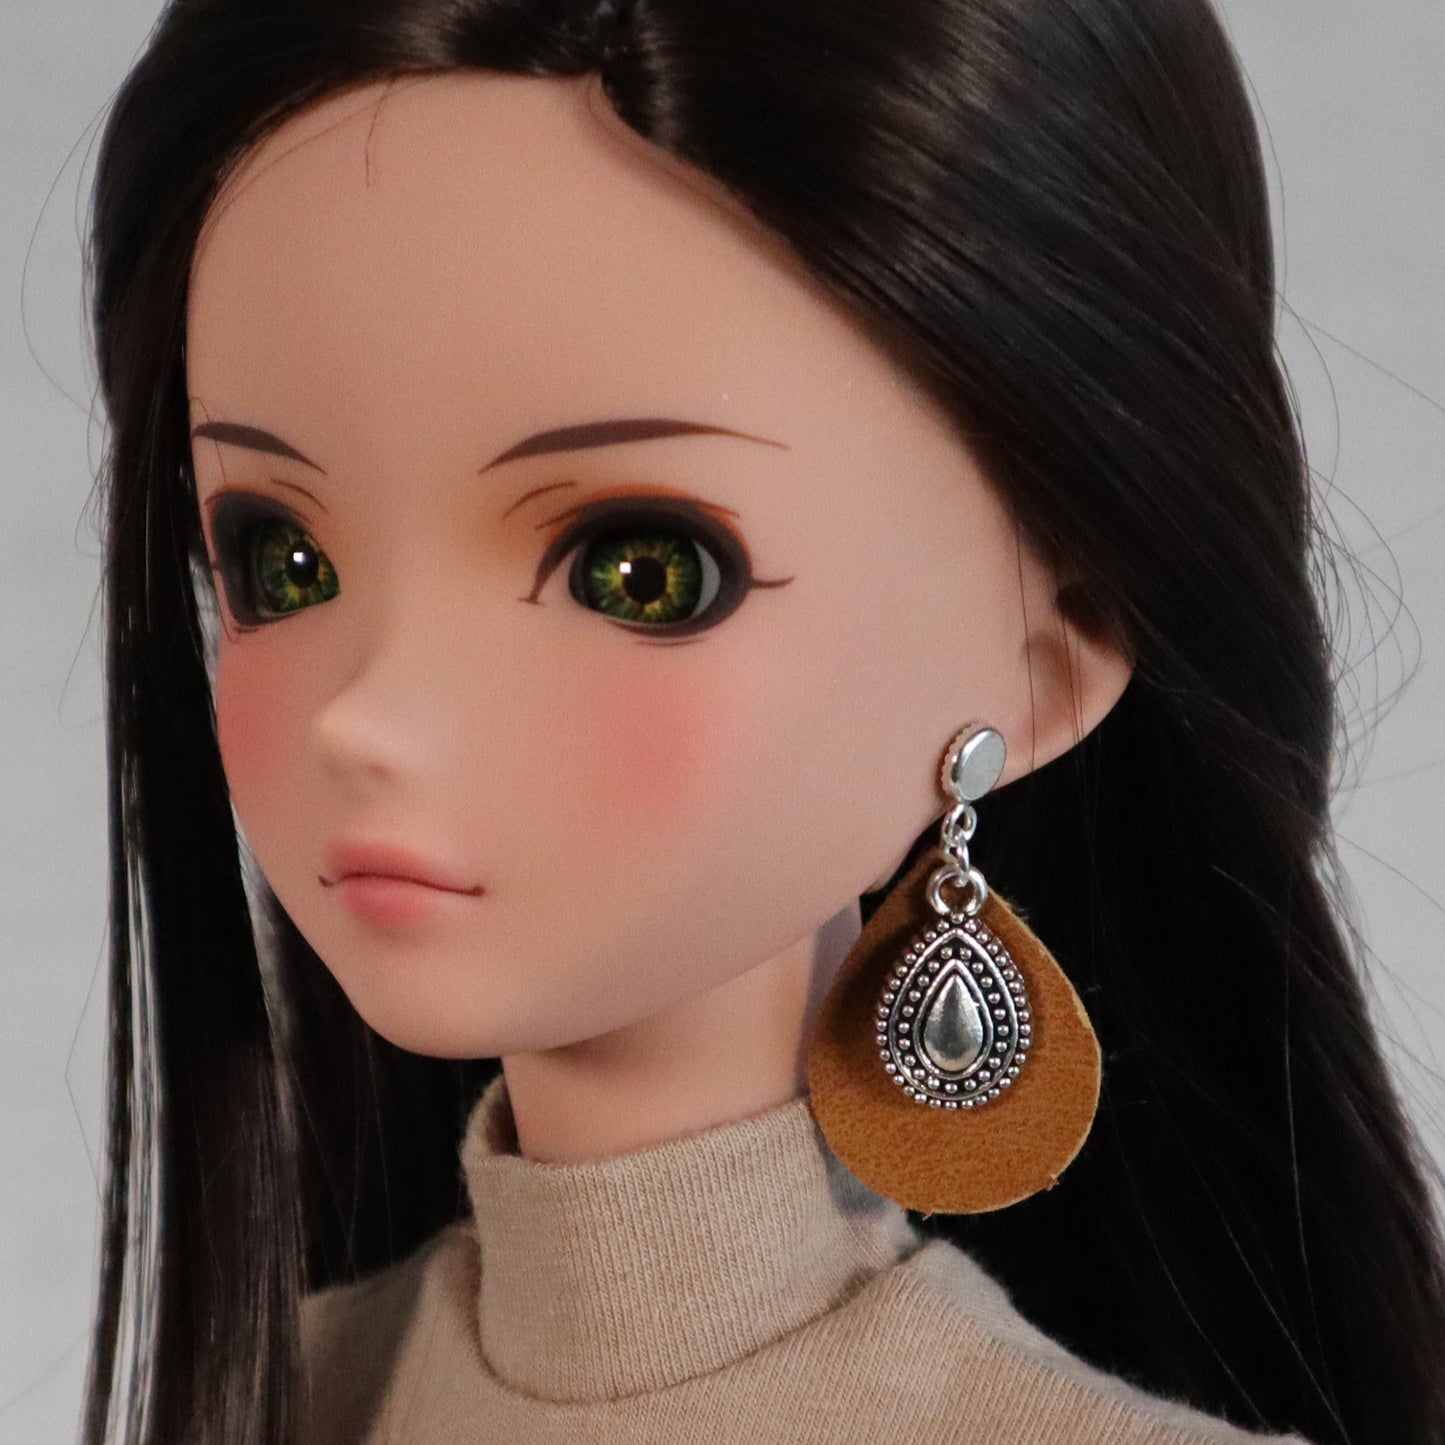 No-Hole Earring for Vinyl Dolls - Concho & Leather (5 Color Choices)